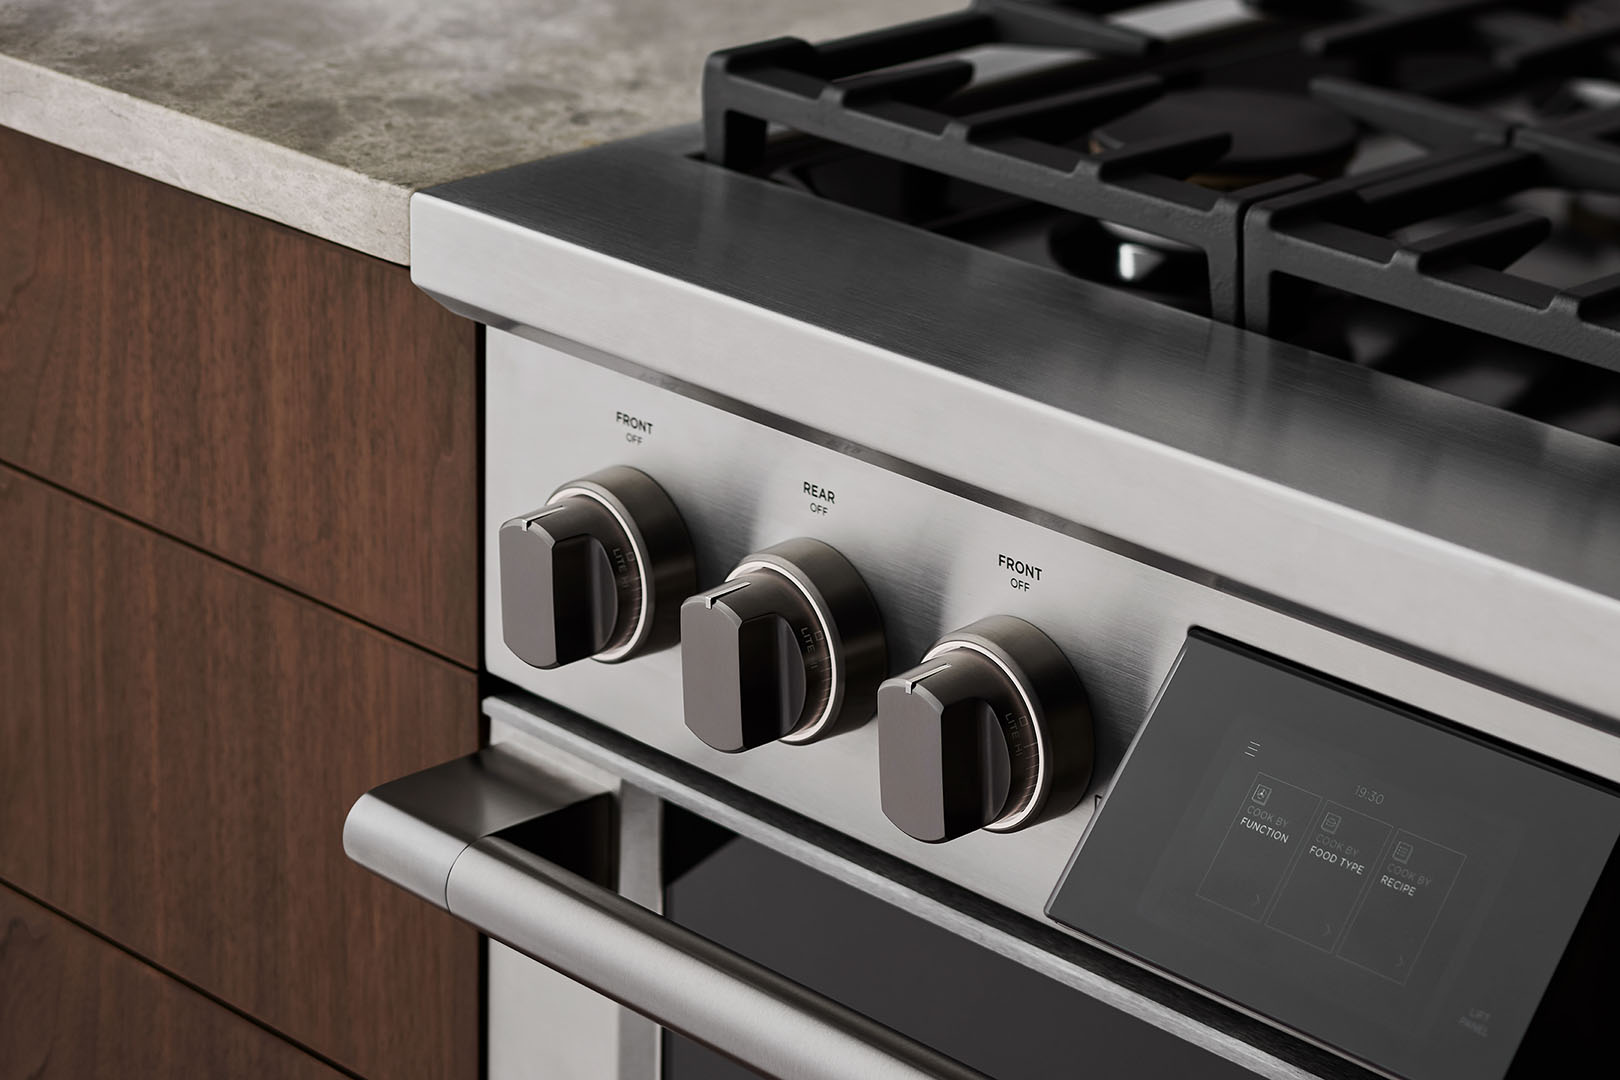 Close up of the high-grade stainless-steel oven and cooktop